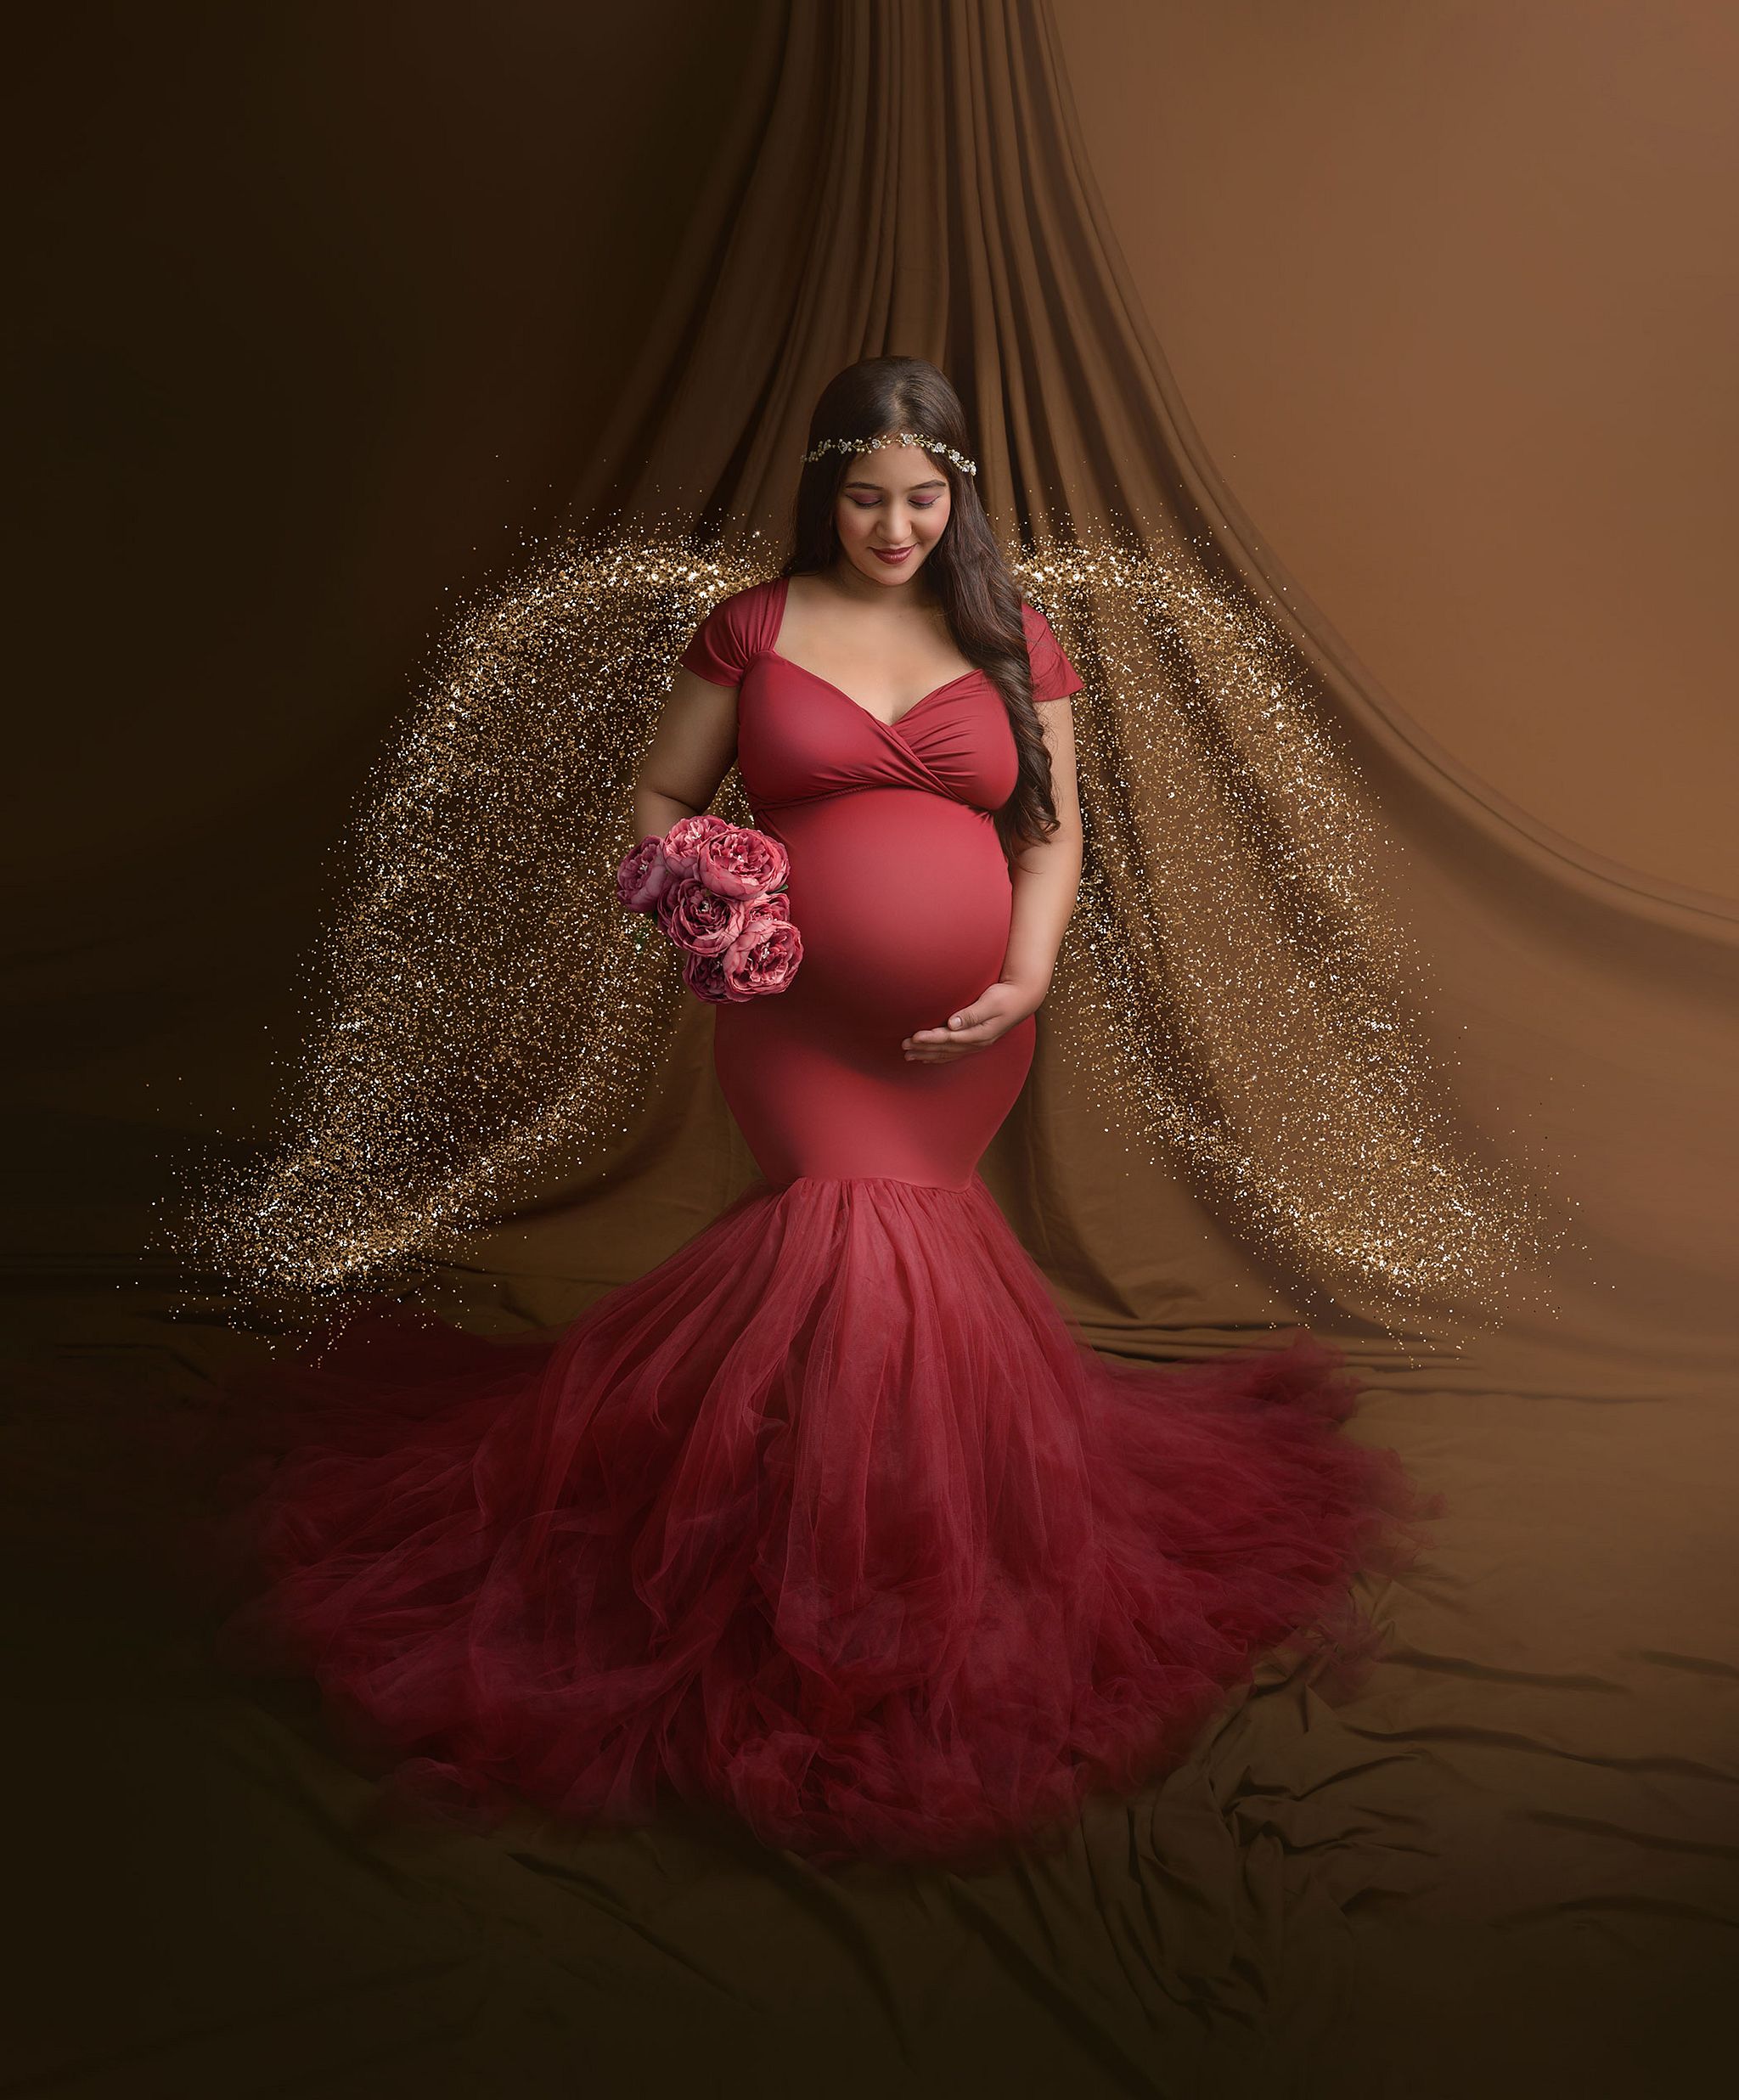 1:1 MATERNITY PHOTOS - Post Processing in Photoshop